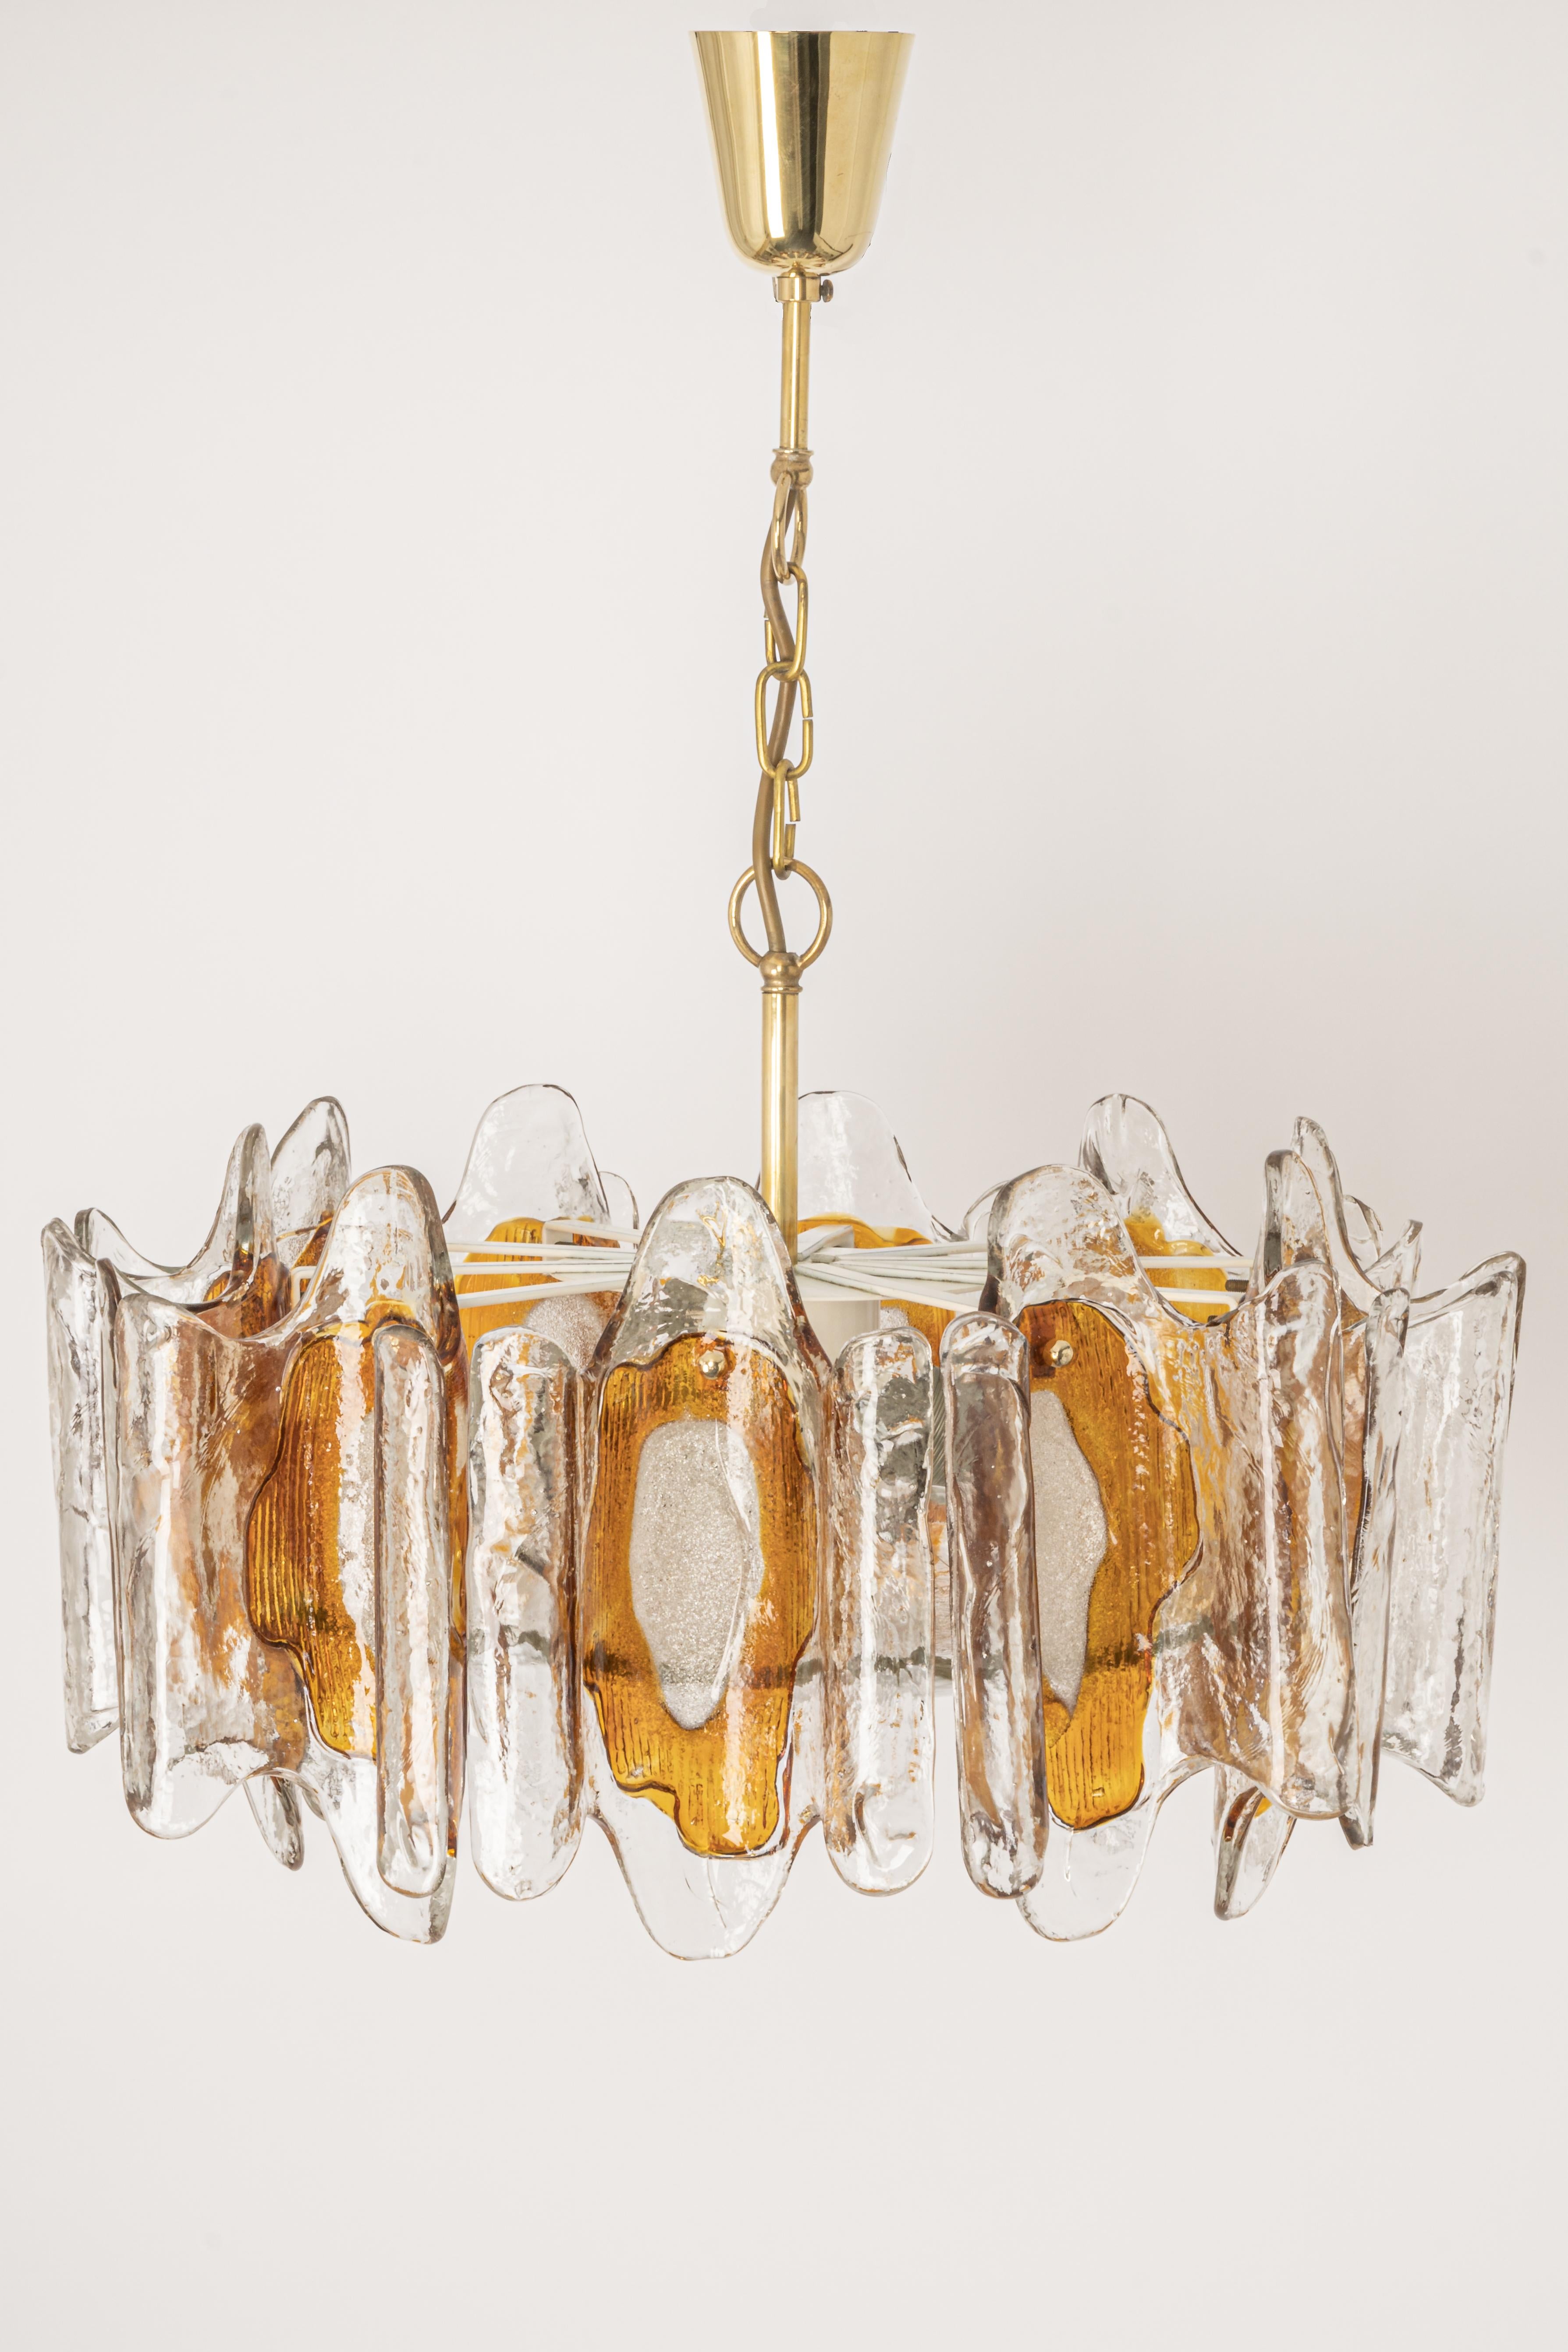 Impressive chandelier made of melted Murano glasses by Kalmar from the 1970s. This chandelier is absolutely timeless because of its simple and modern design.
Heavy quality and in very good condition. Cleaned, well-wired, and ready to use. 

The